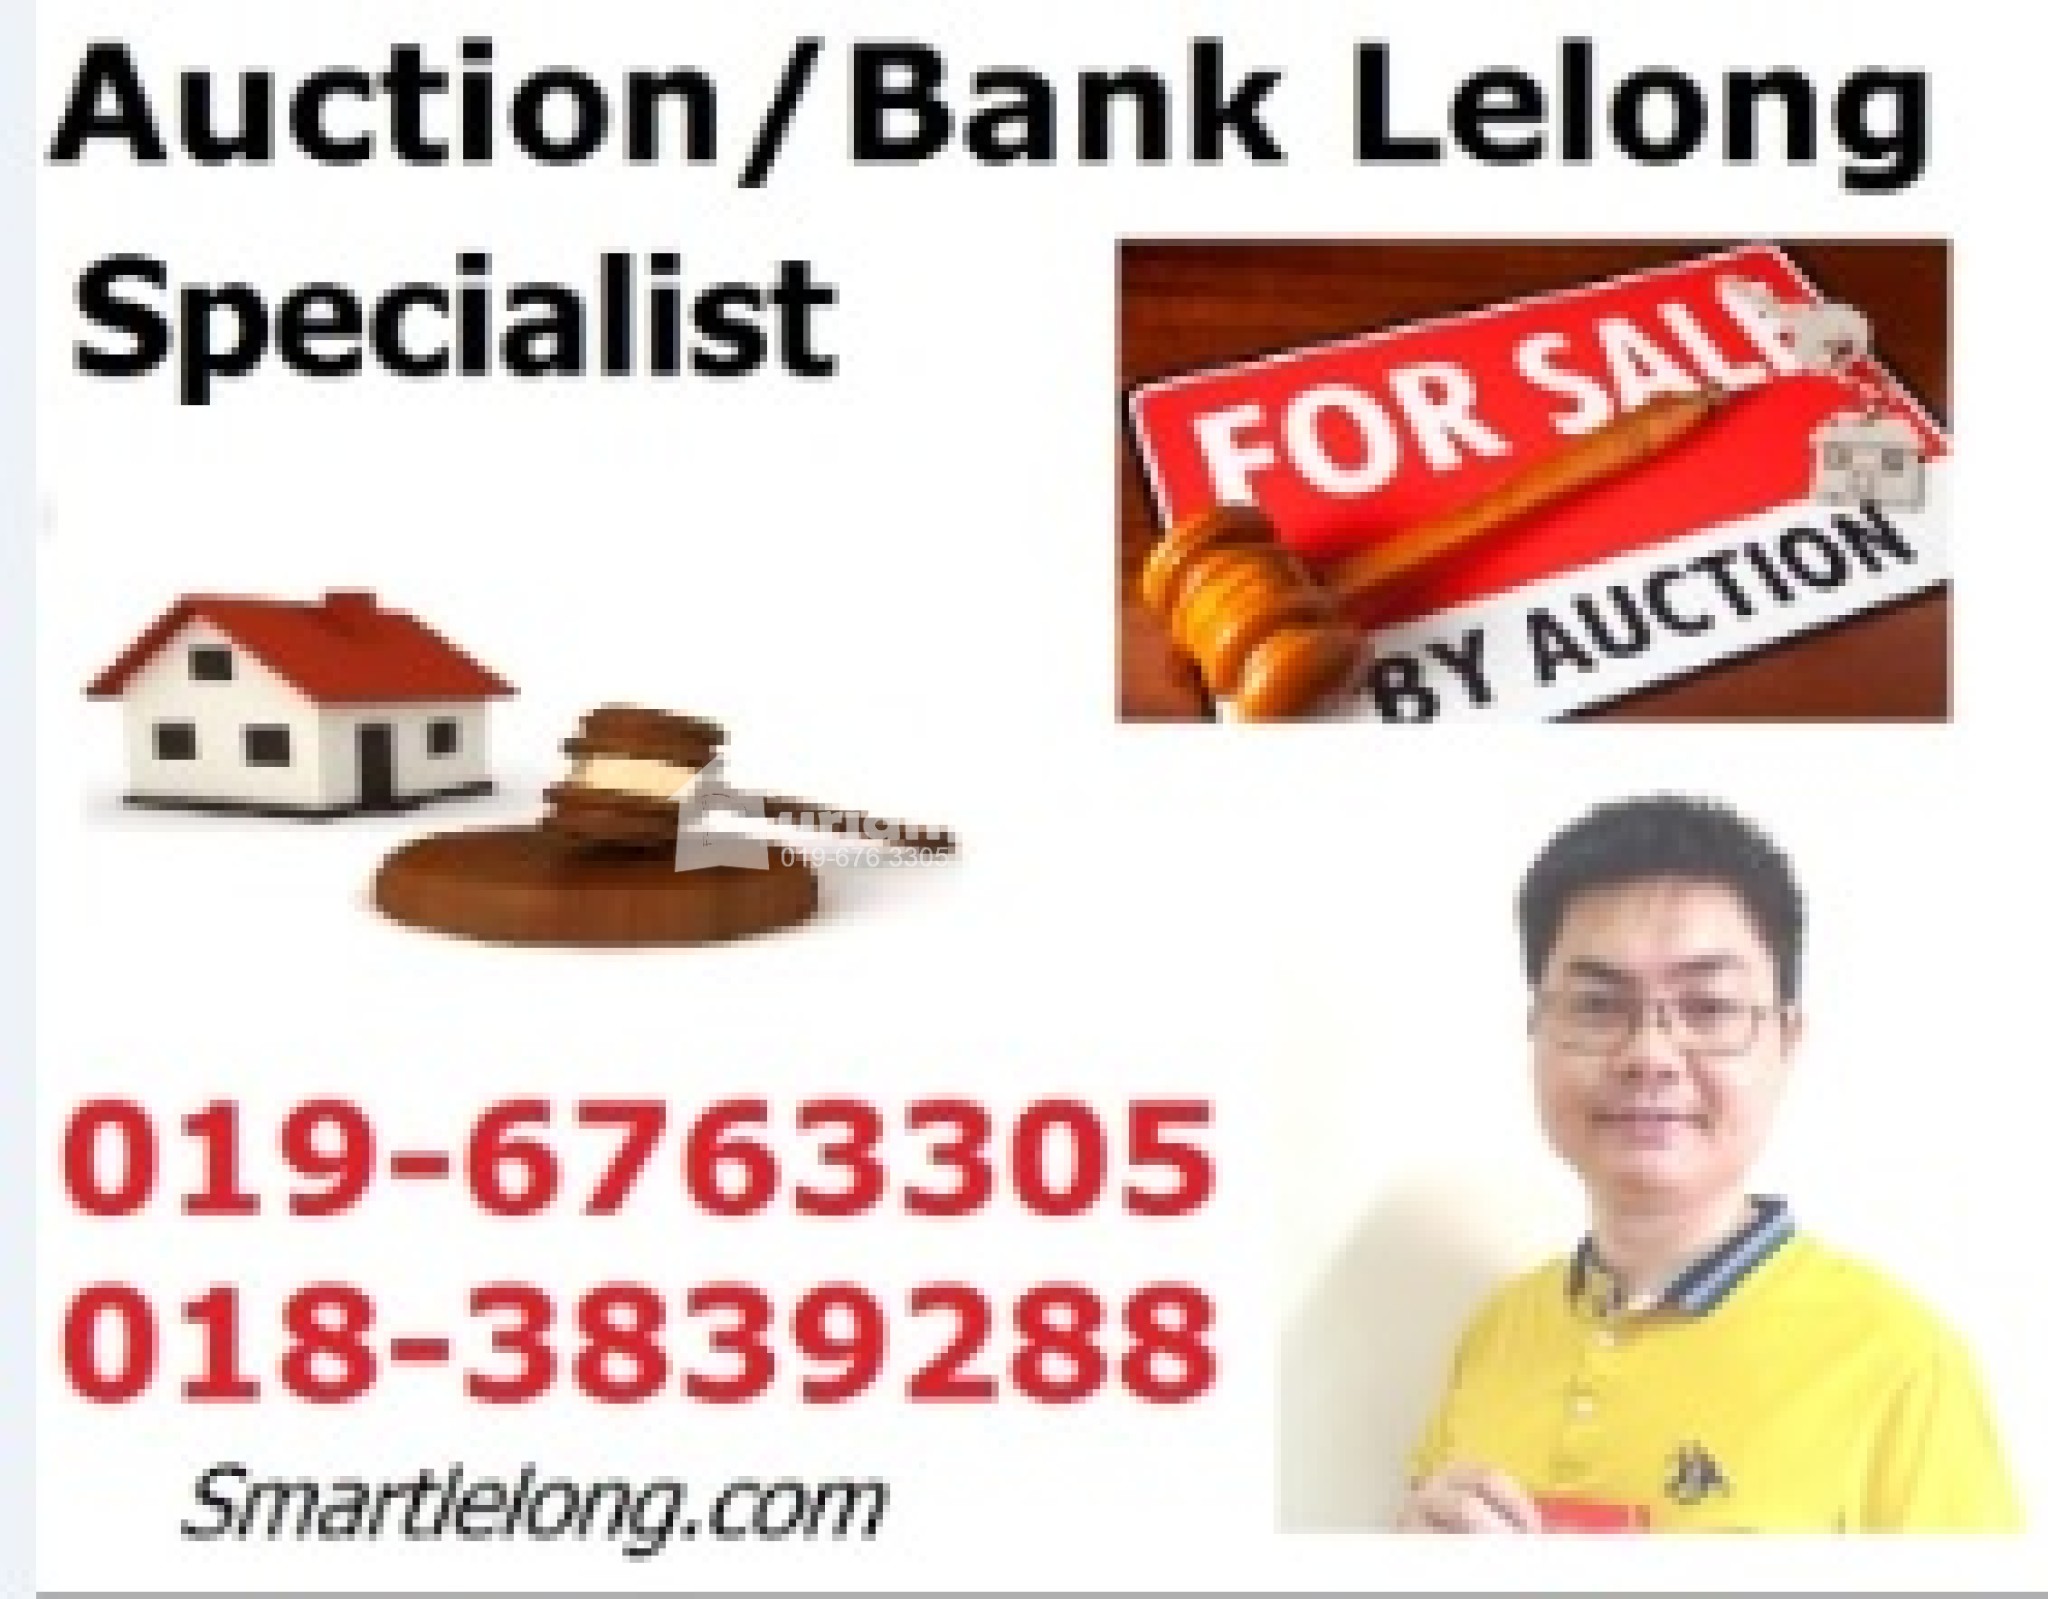 Bungalow House For Sale at Kota Bharu